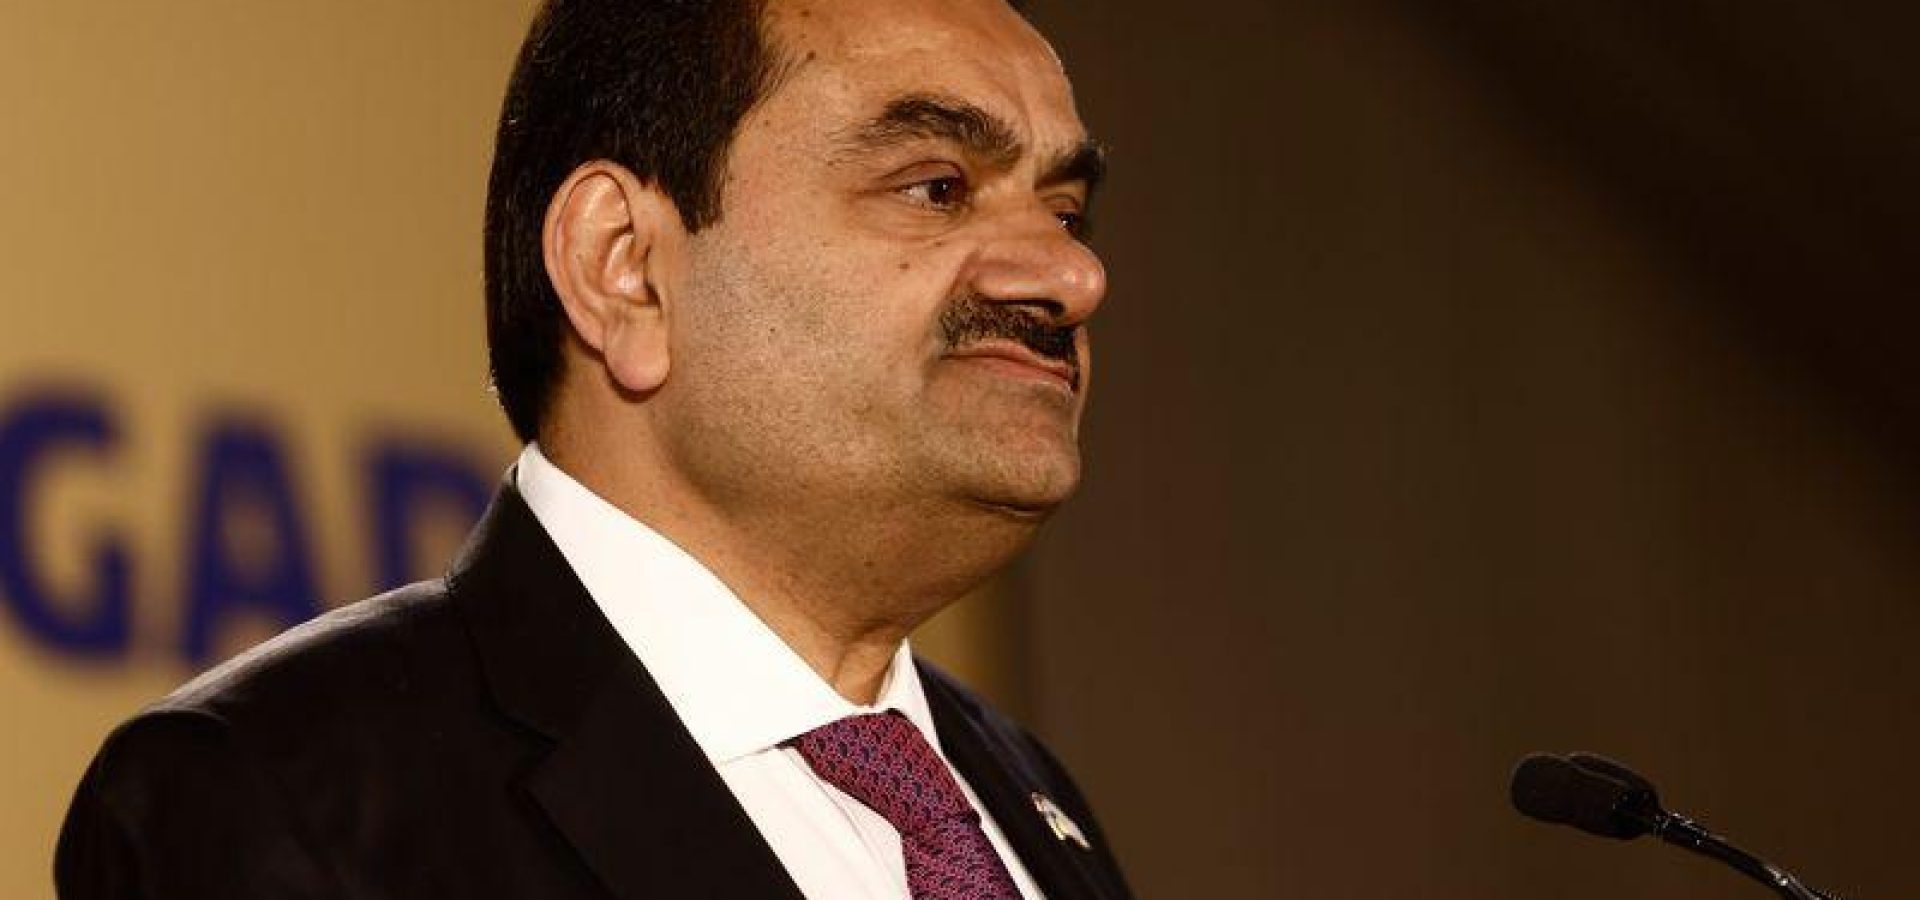 Adani Stocks Keep Going Down in a Selling Rout